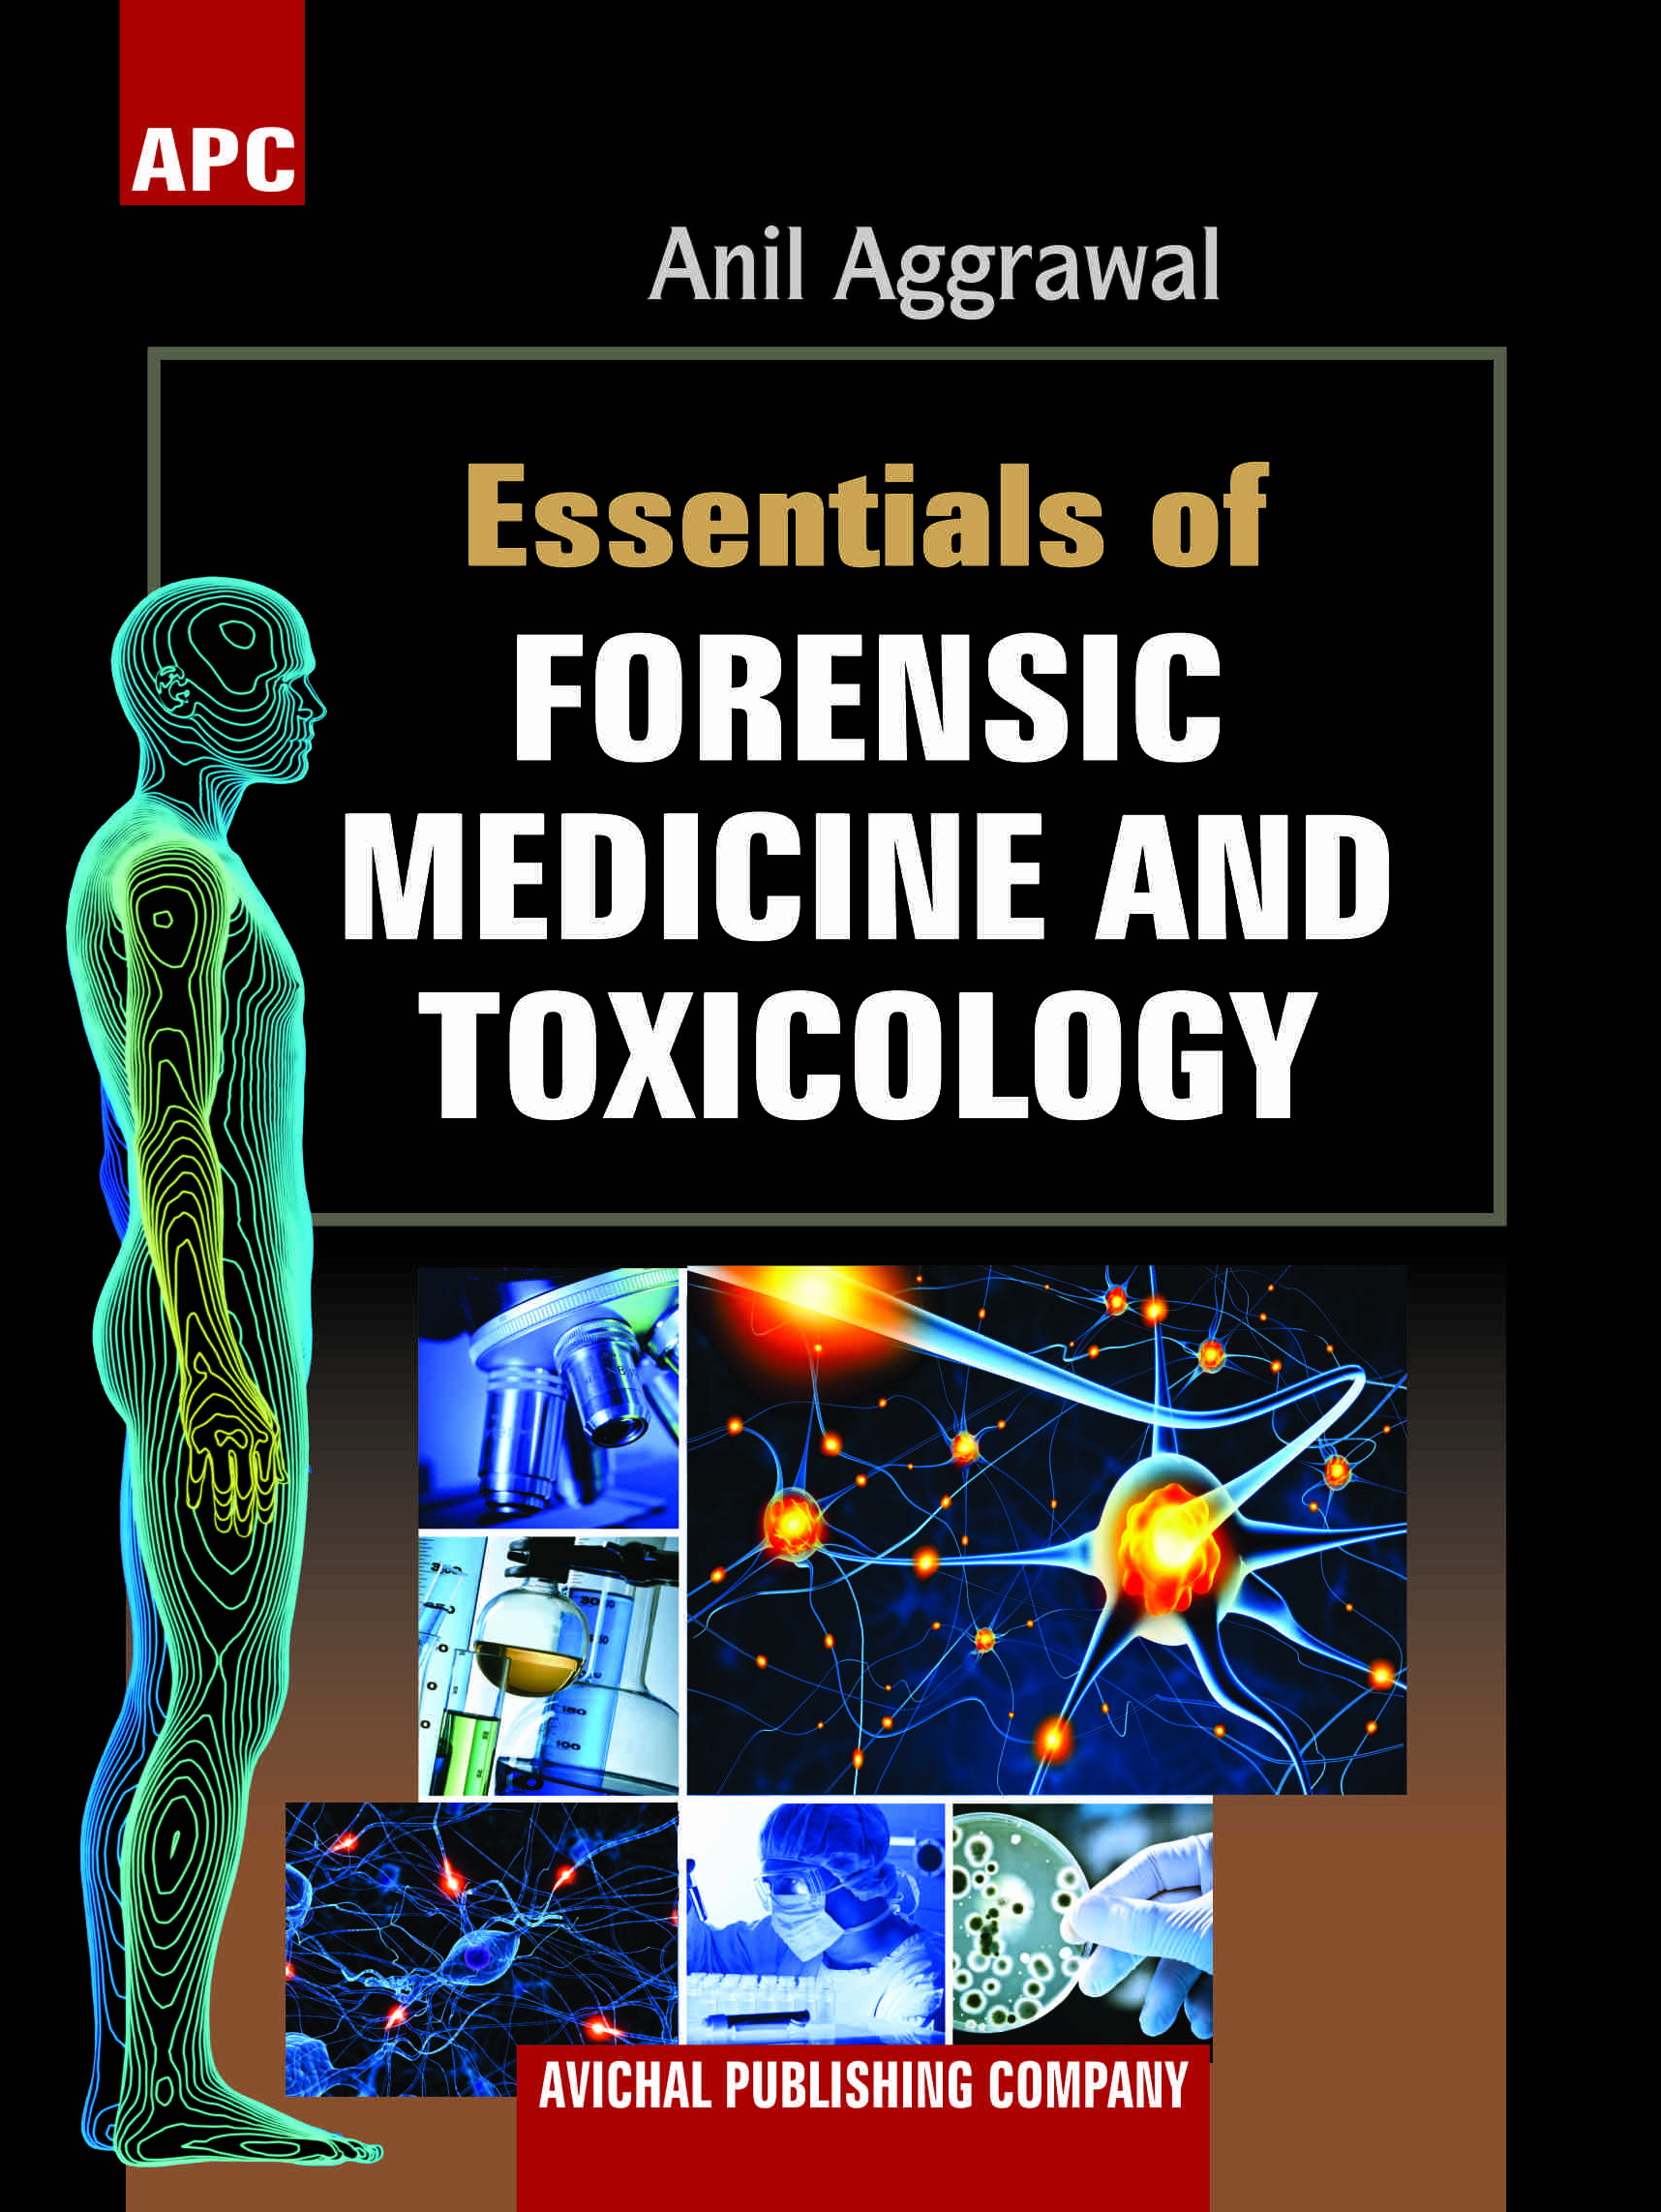 Essentials of Forensic Medicine and Toxicology, First Edition, 2014 by Anil Aggrawal